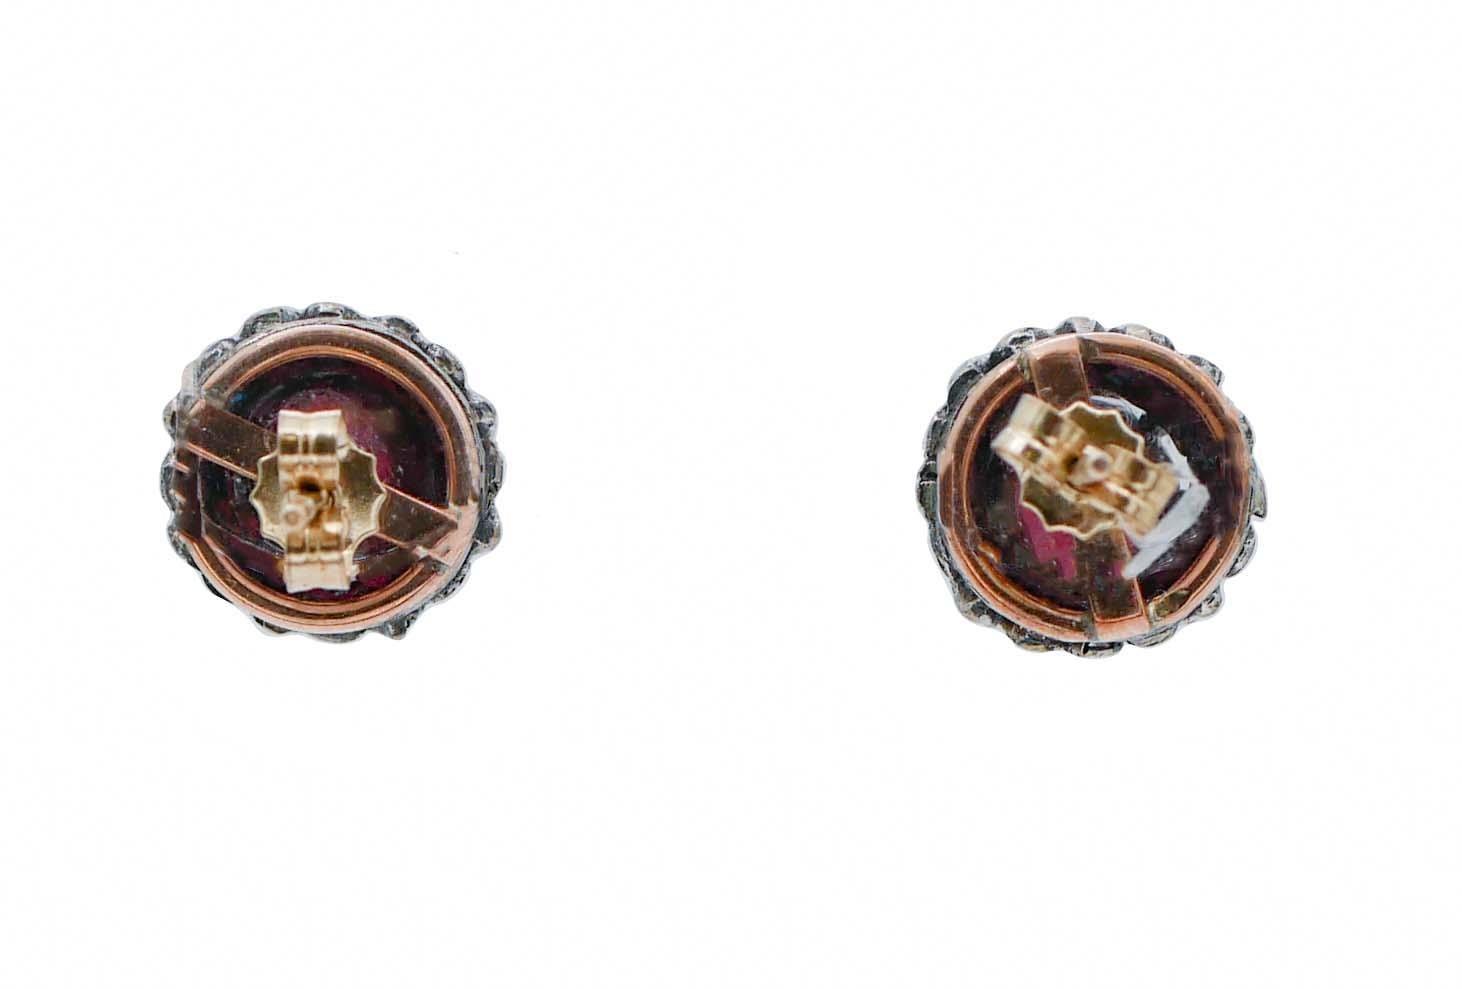 Mixed Cut Diamonds, Garnets, Rose Gold and Silver Stud Earrings